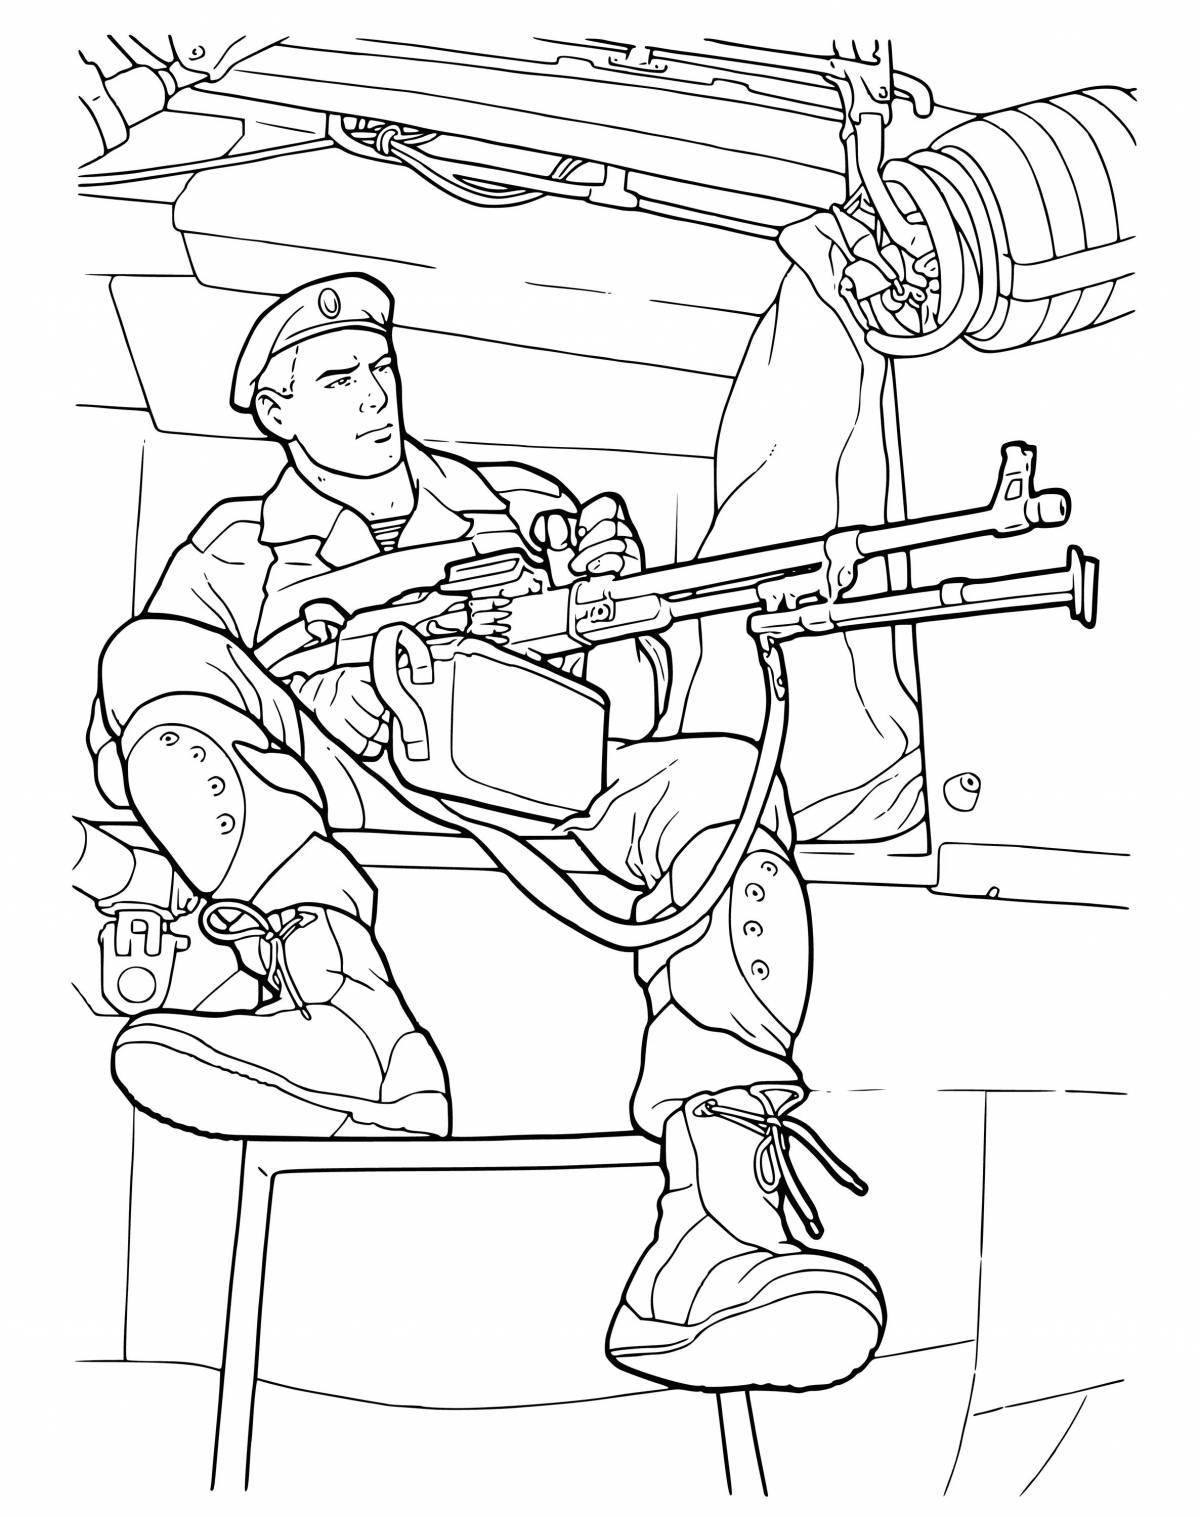 Refined Soldier coloring page February 23